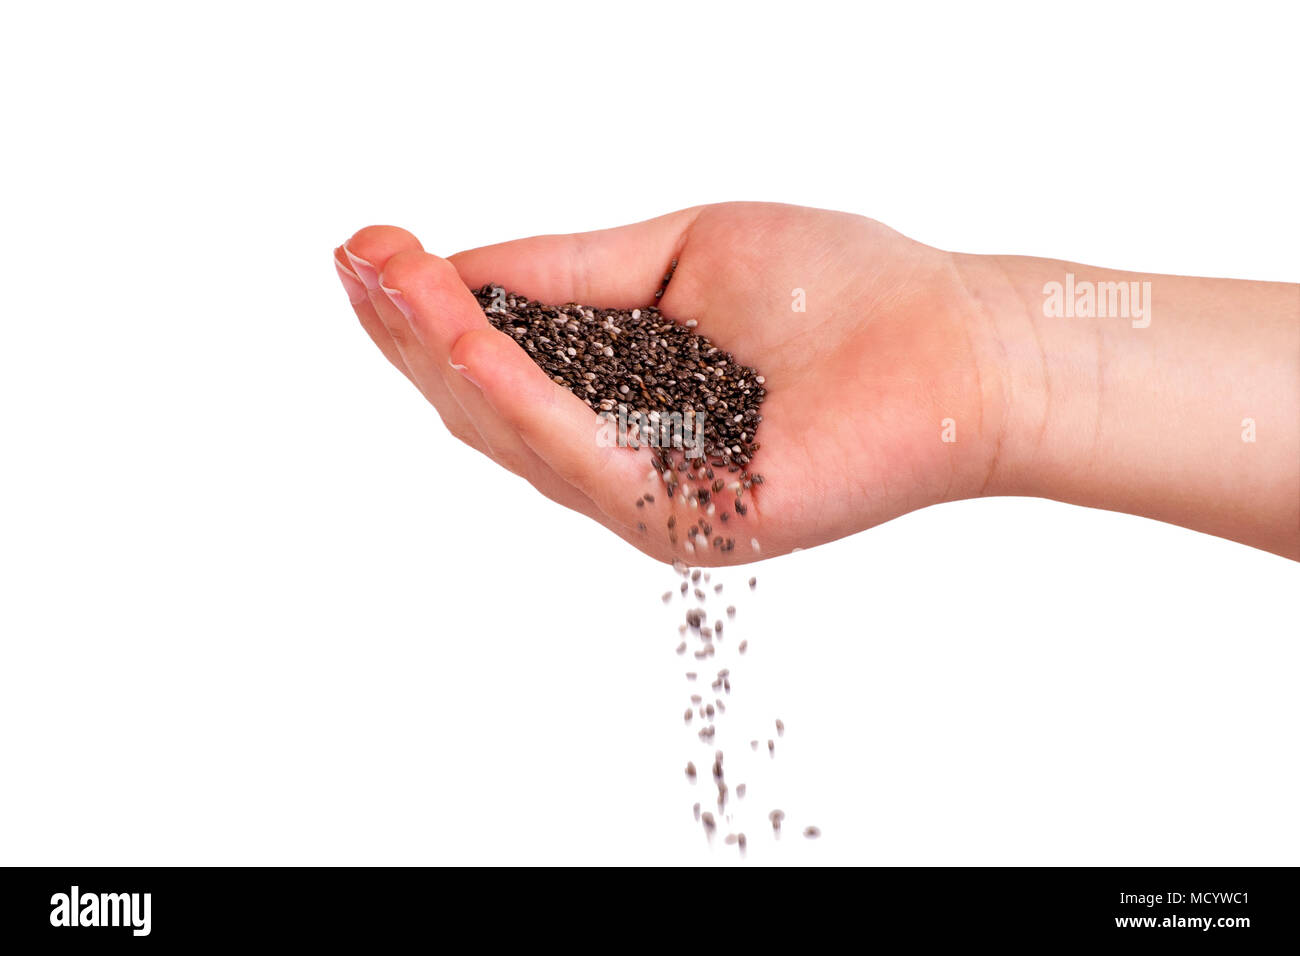 Chia seeds falling from hand. Isolated over white. Stock Photo